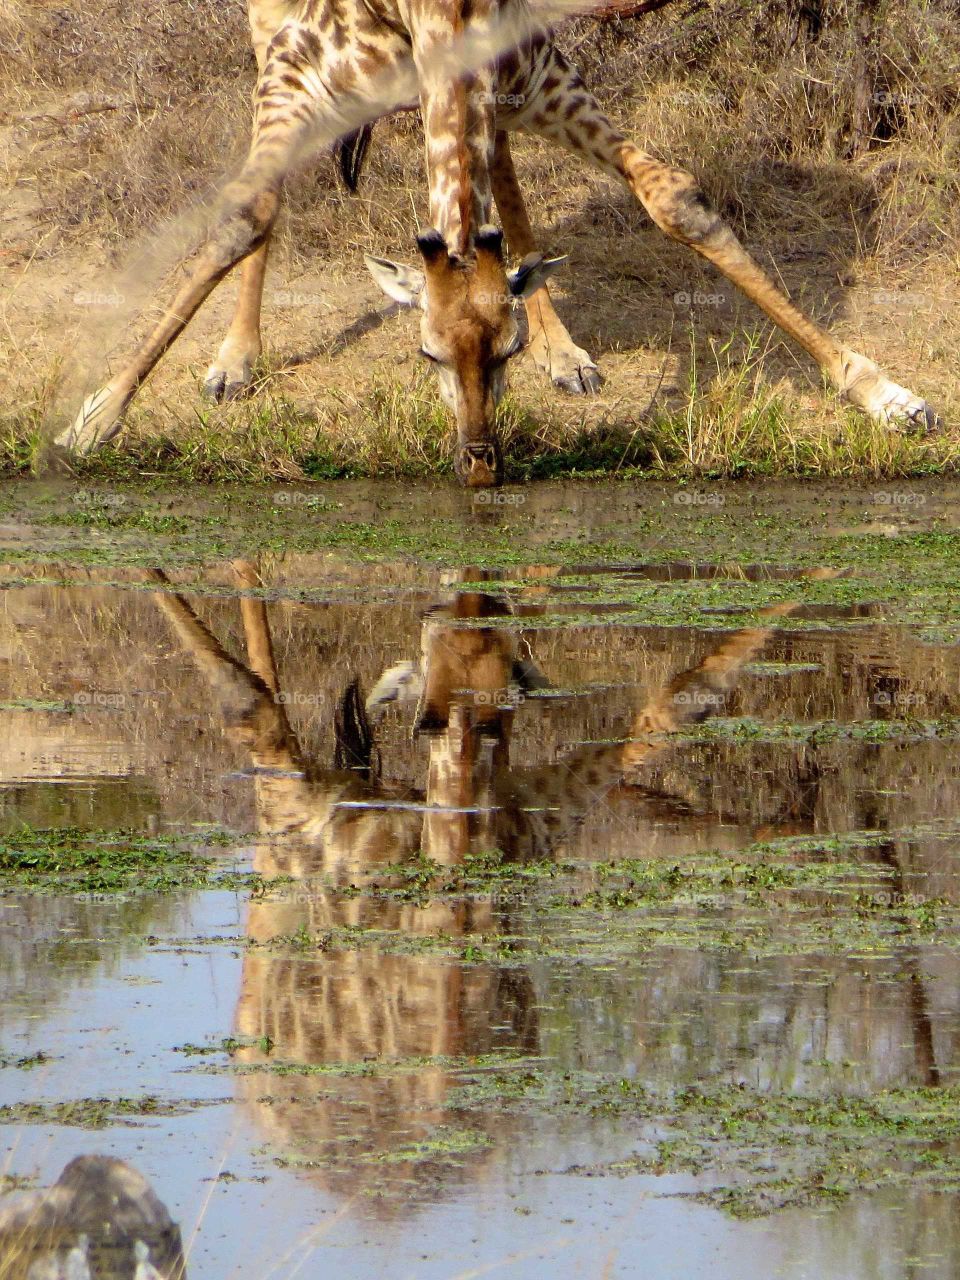 A giraffe takes a tentative drink at a watering hole in Kruger National Park